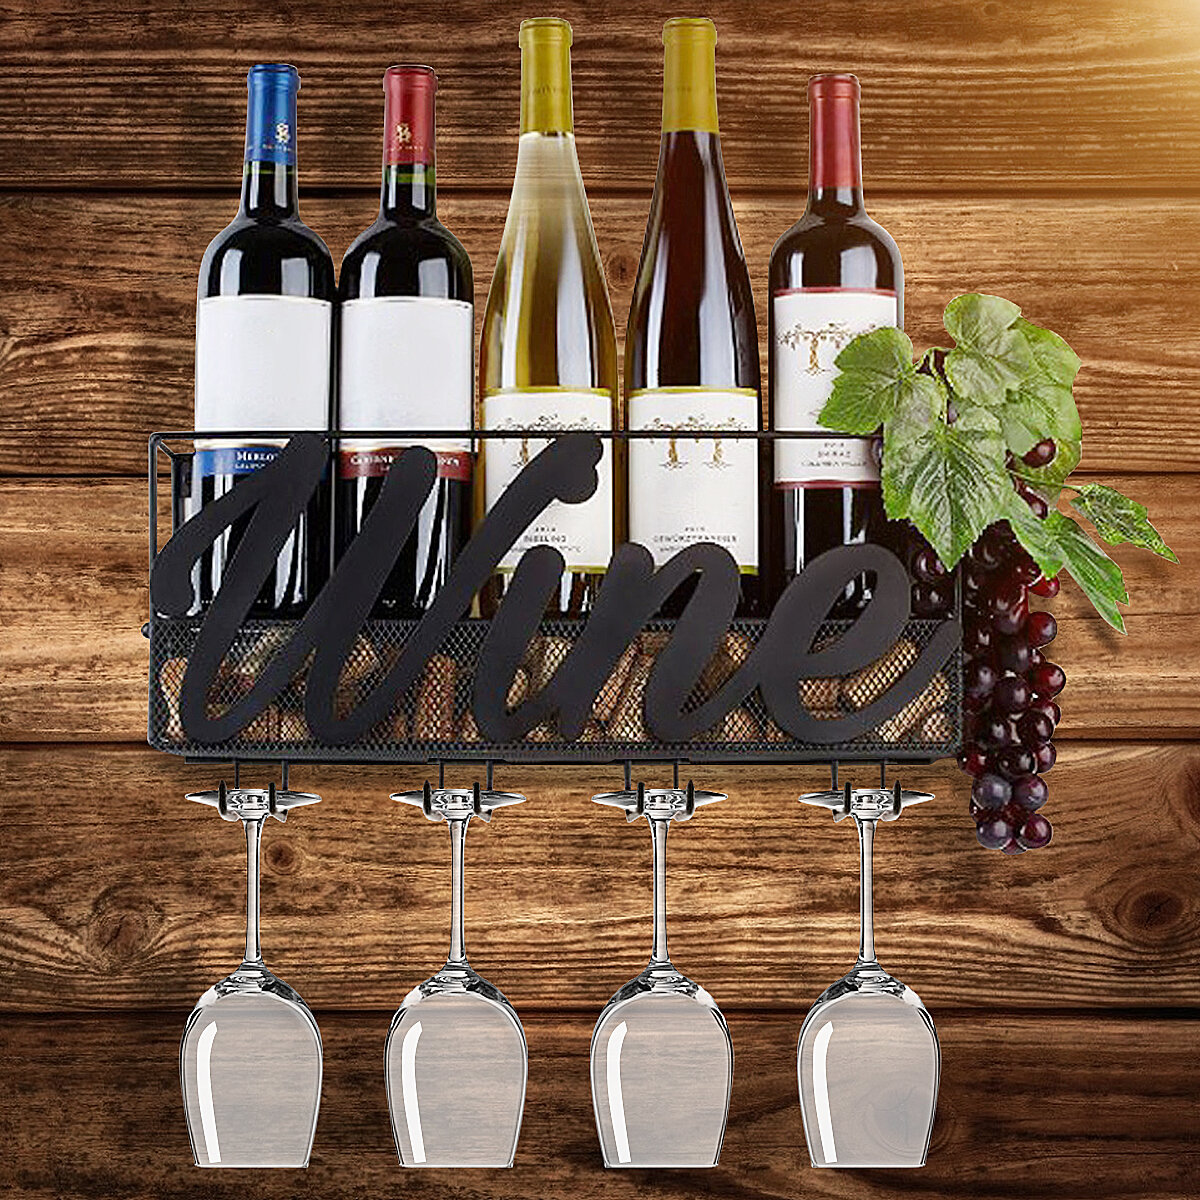 Image of Tiebohui Practical Liquor Rack Wall Mounted Goblet Holder Easy Install Iron Wire Durable Storage Shelf